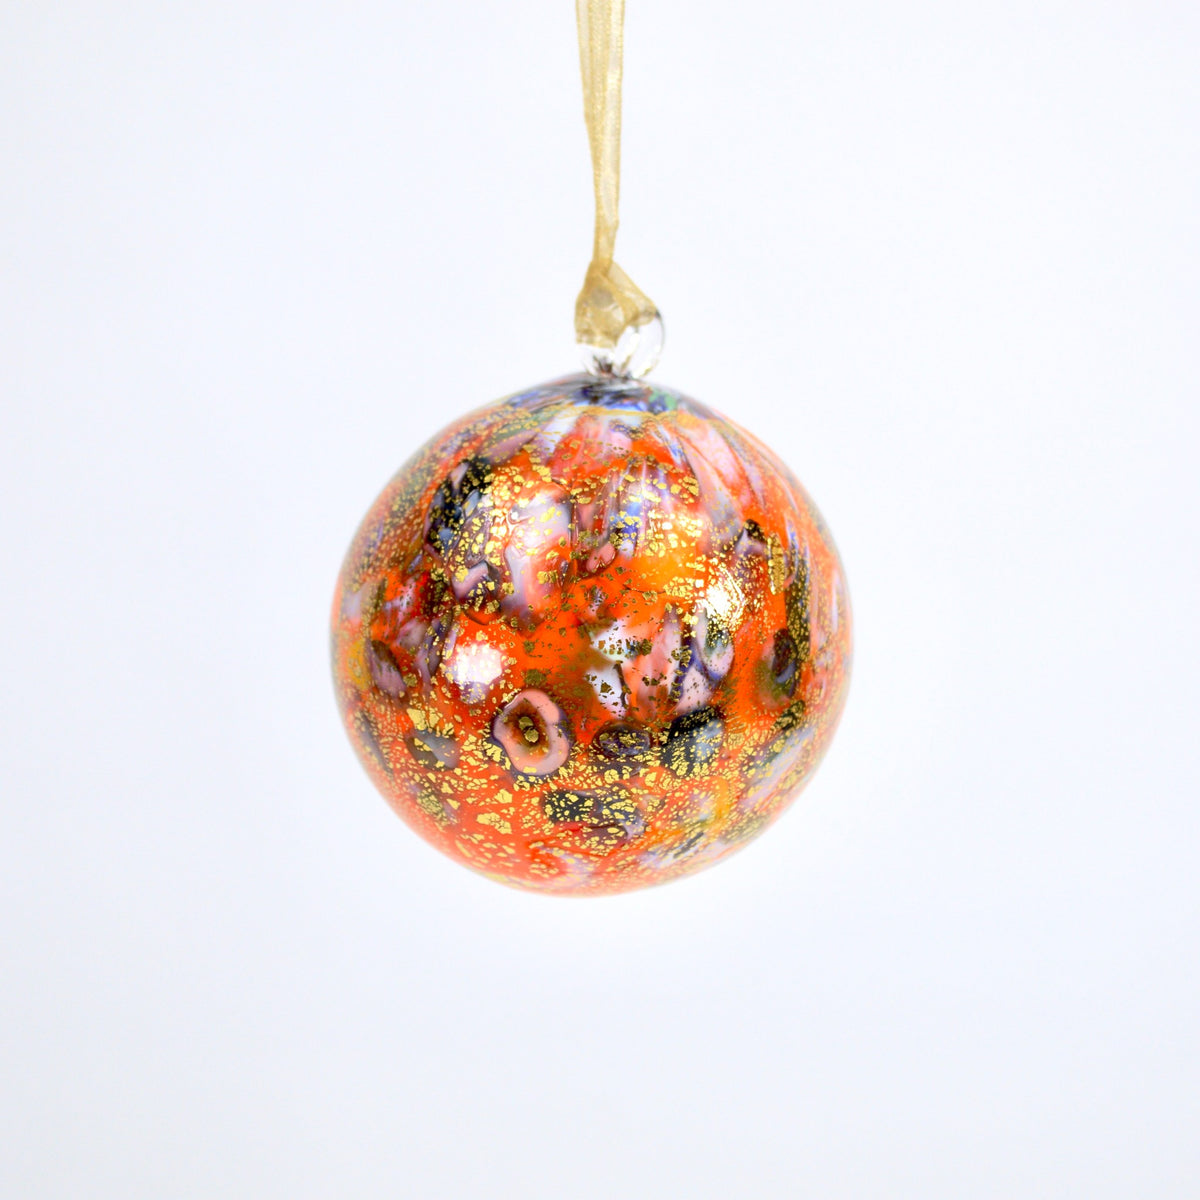 Murano Blown Glass Holiday Ornament with Spotted Macchia Accents, Made in Murano, Italy